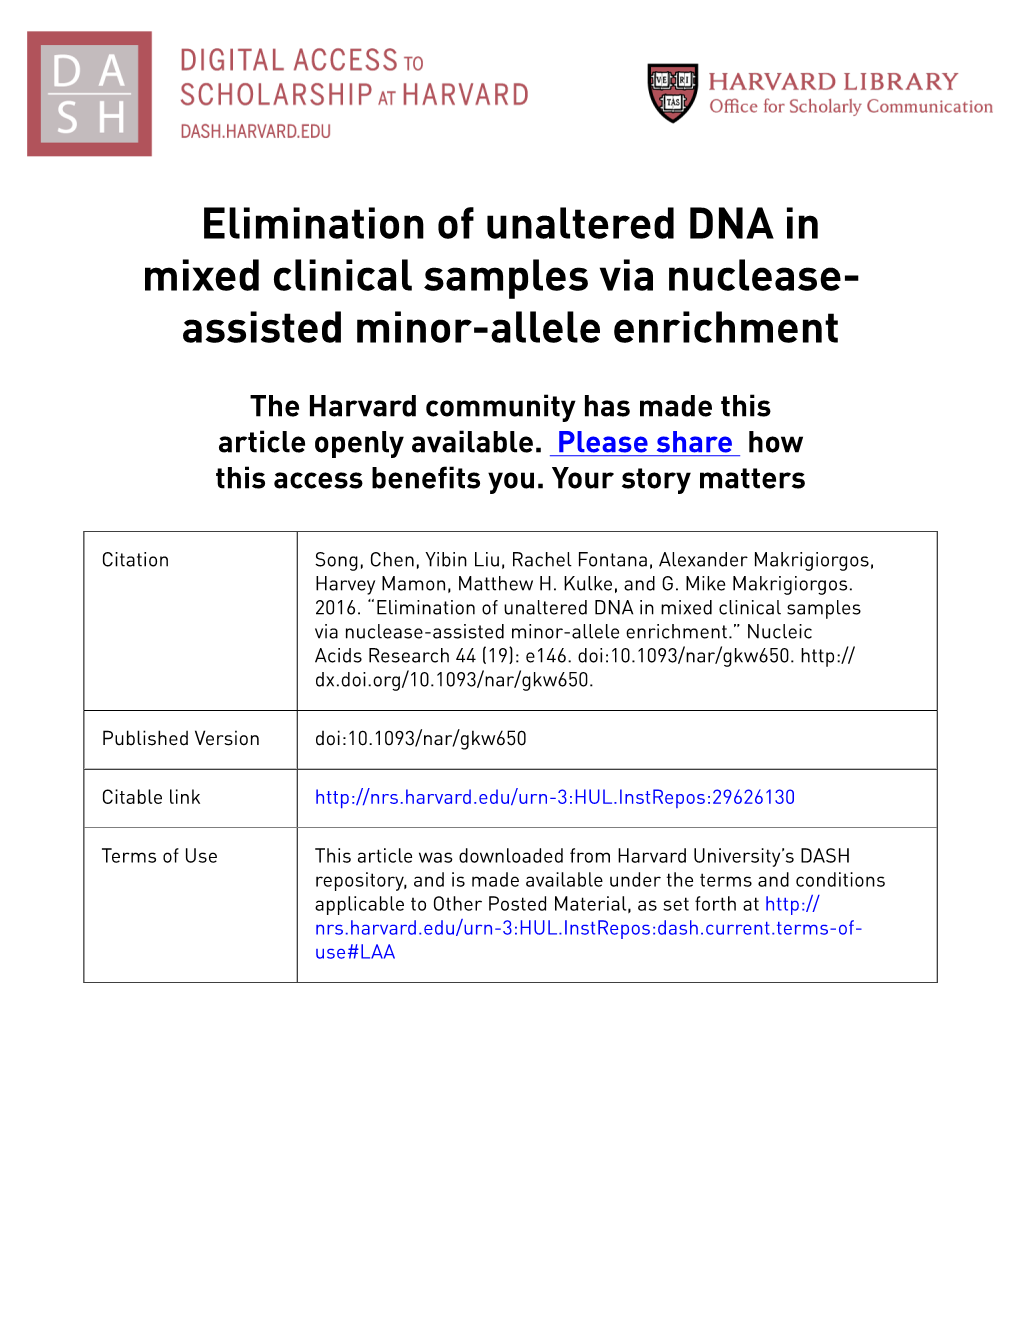 Elimination of Unaltered DNA in Mixed Clinical Samples Via Nuclease- Assisted Minor-Allele Enrichment